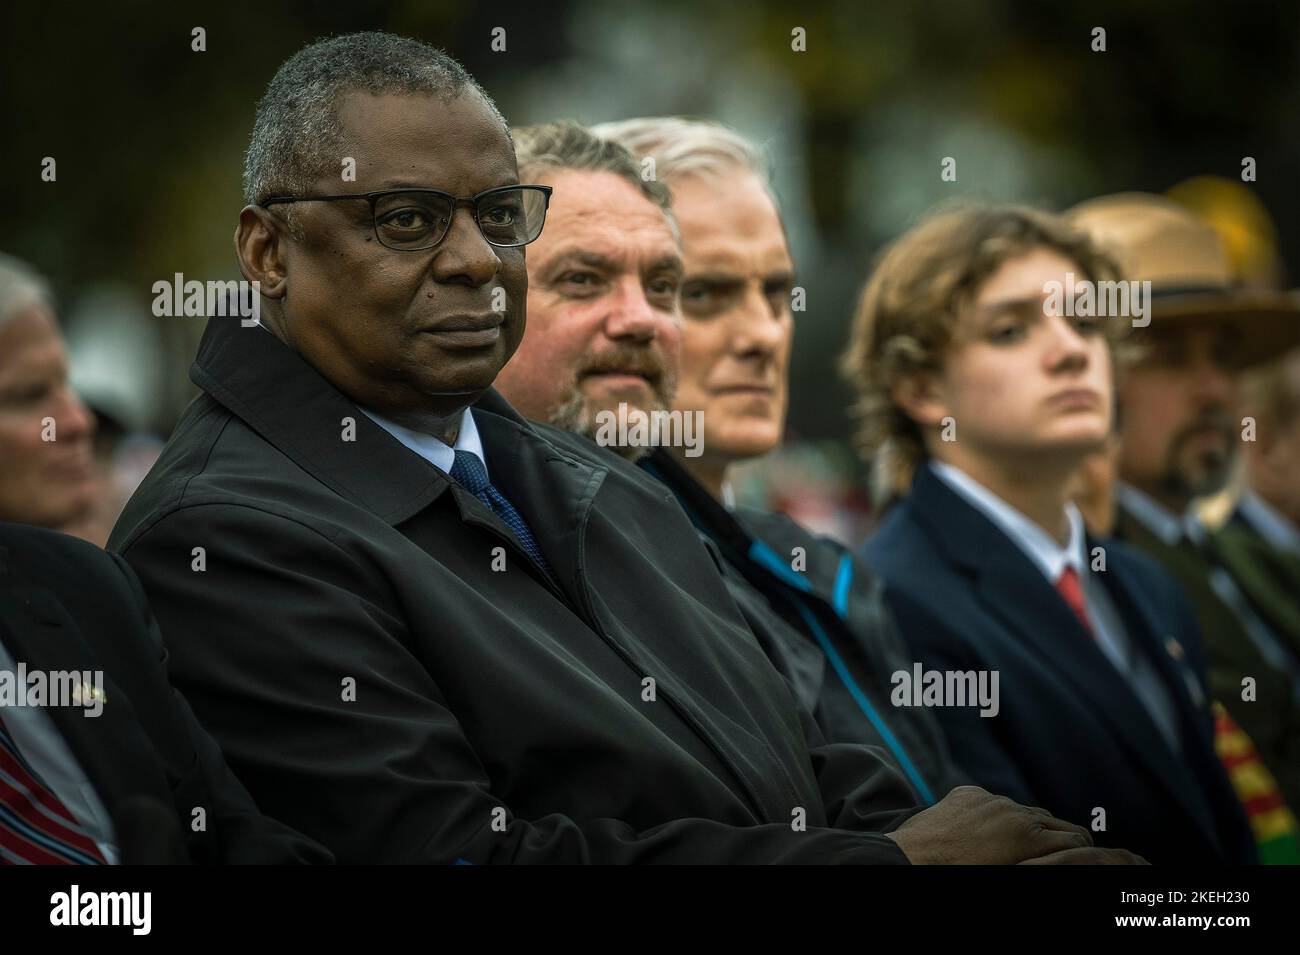 Washington, United States Of America. 11th Nov, 2022. Washington, United States of America. 11 November, 2022. U.S. Secretary of Defense Lloyd J. Austin III, left, sits with Secretary of the Veterans Administration, Denis McDonough, center, during the Veterans Day Observance at the Vietnam Veterans Memorial, November 11, 2022 in Washington, DC The day marked the 40th anniversary of the memorial dedication. Credit: Chad J. McNeeley/DOD Photo/Alamy Live News Stock Photo